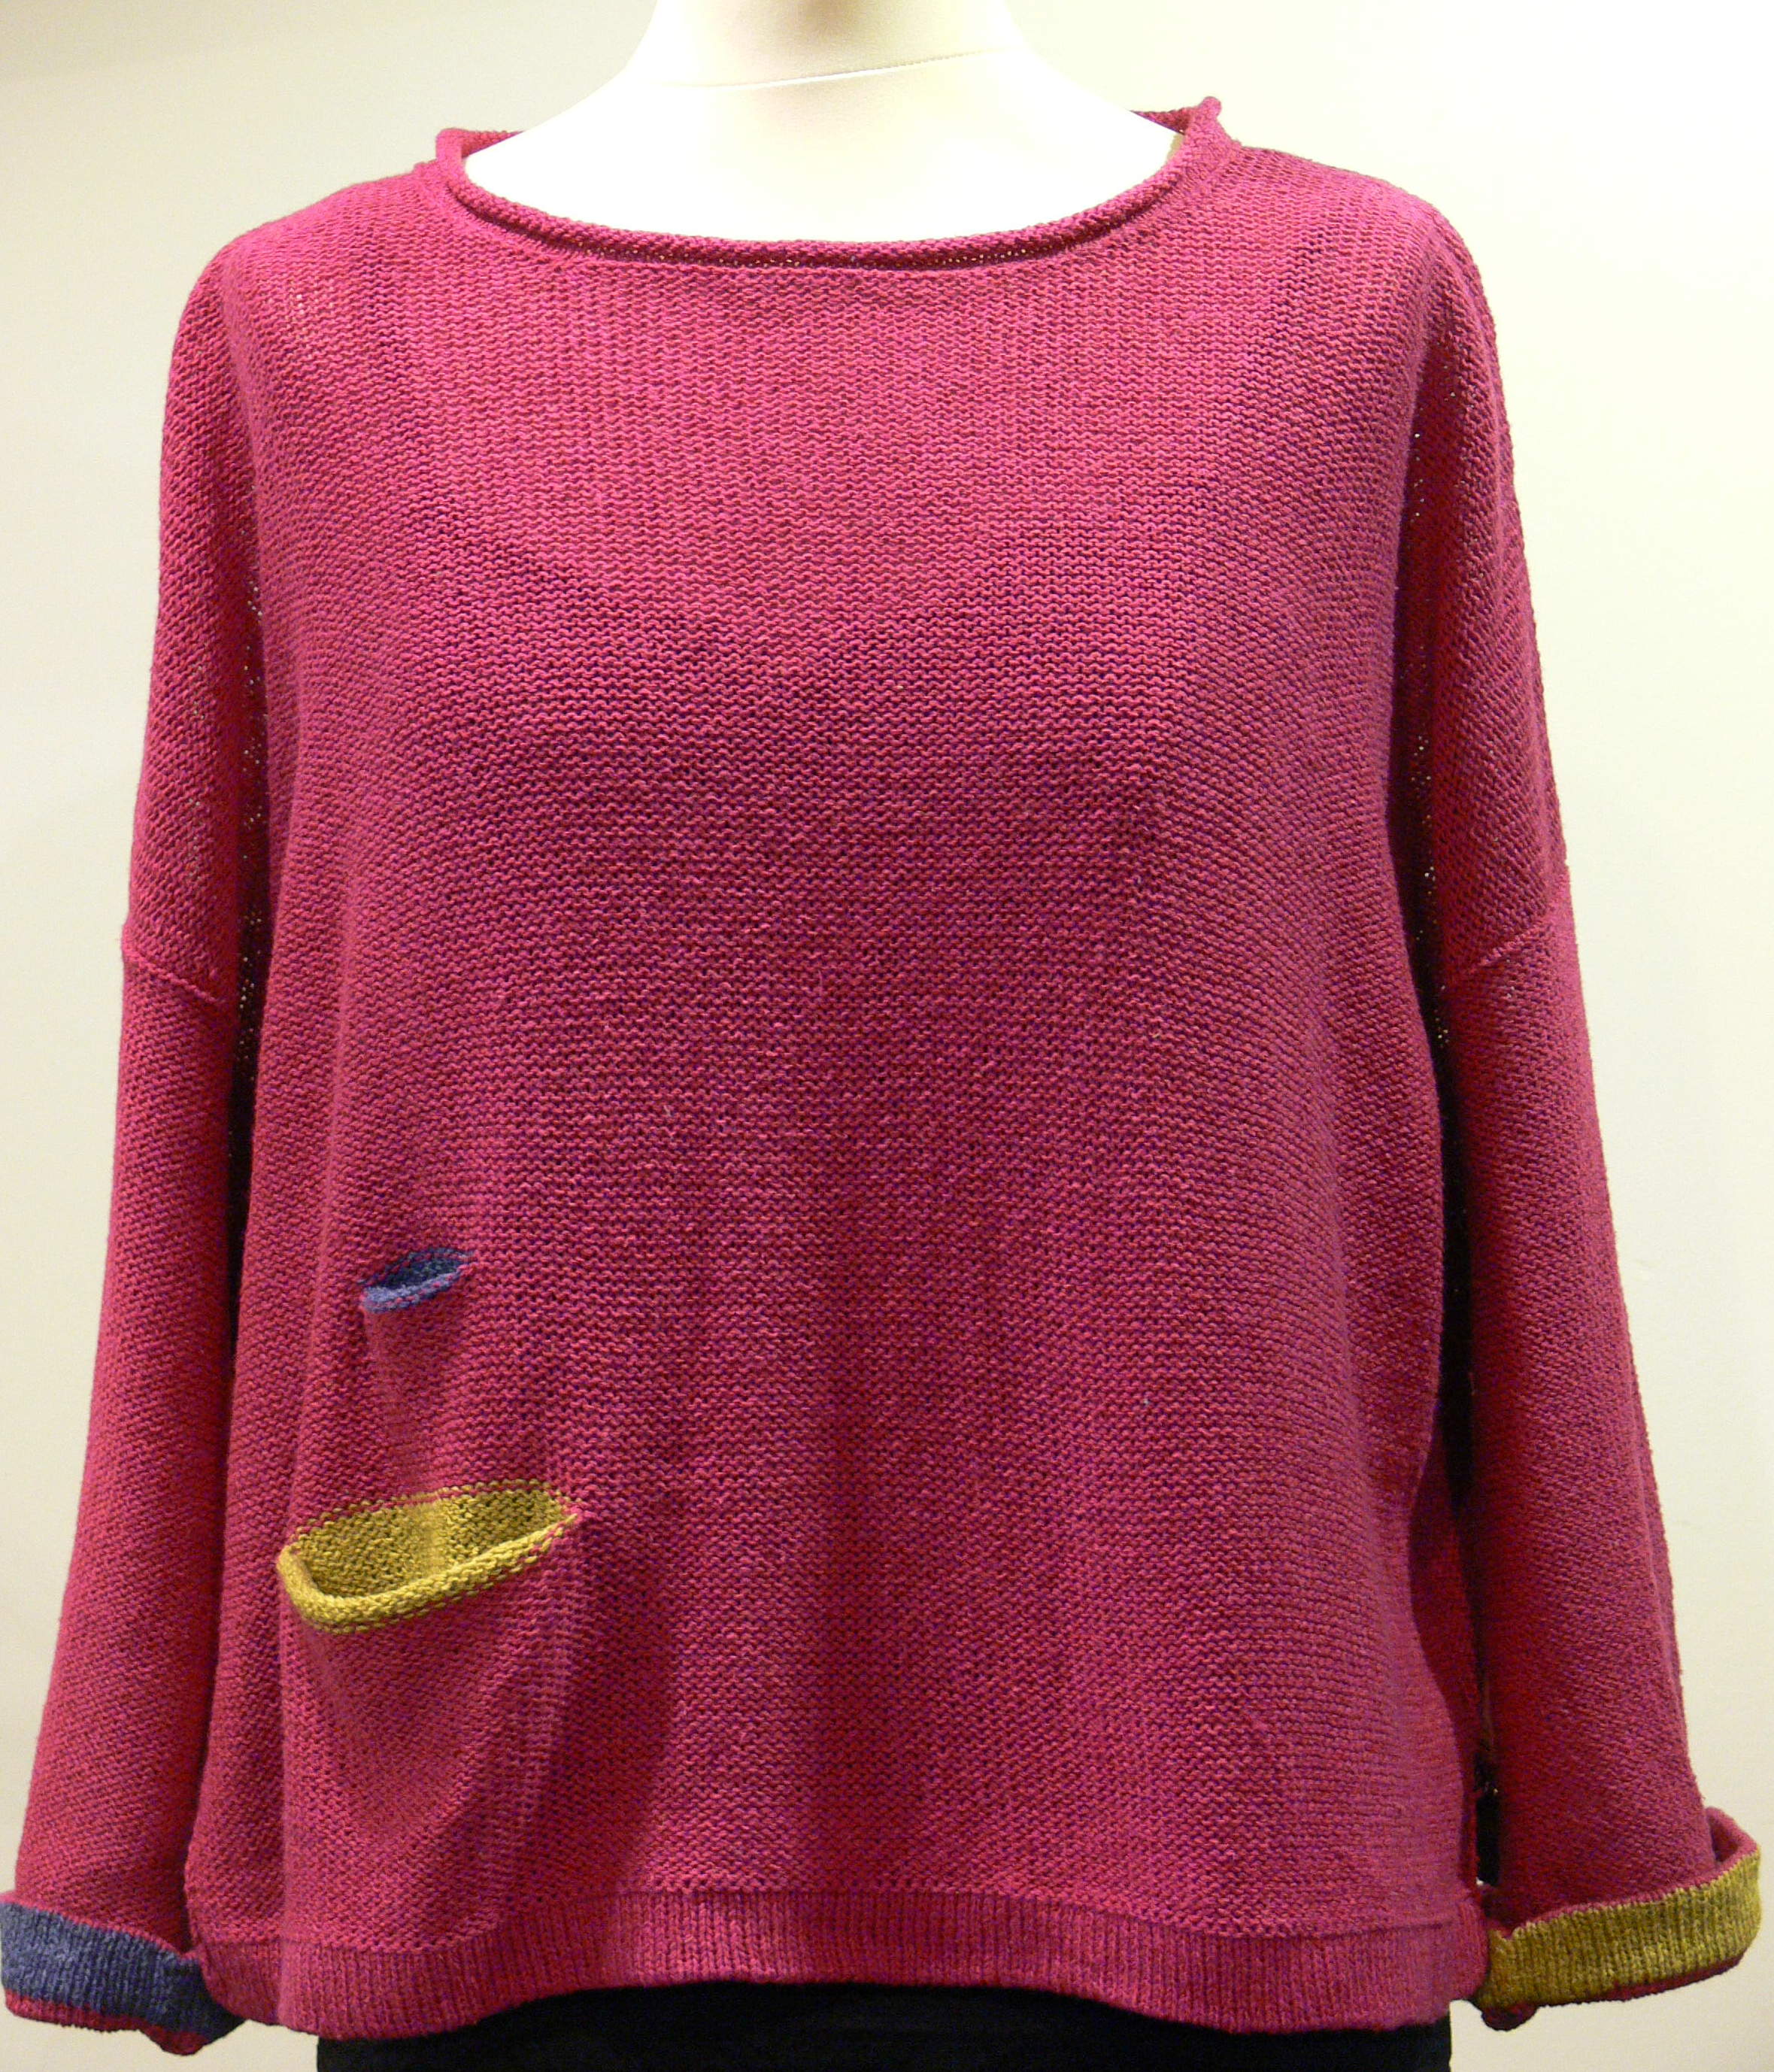 Duet medium tunic, bright pink knitted in silk/ lambswool with two pockets